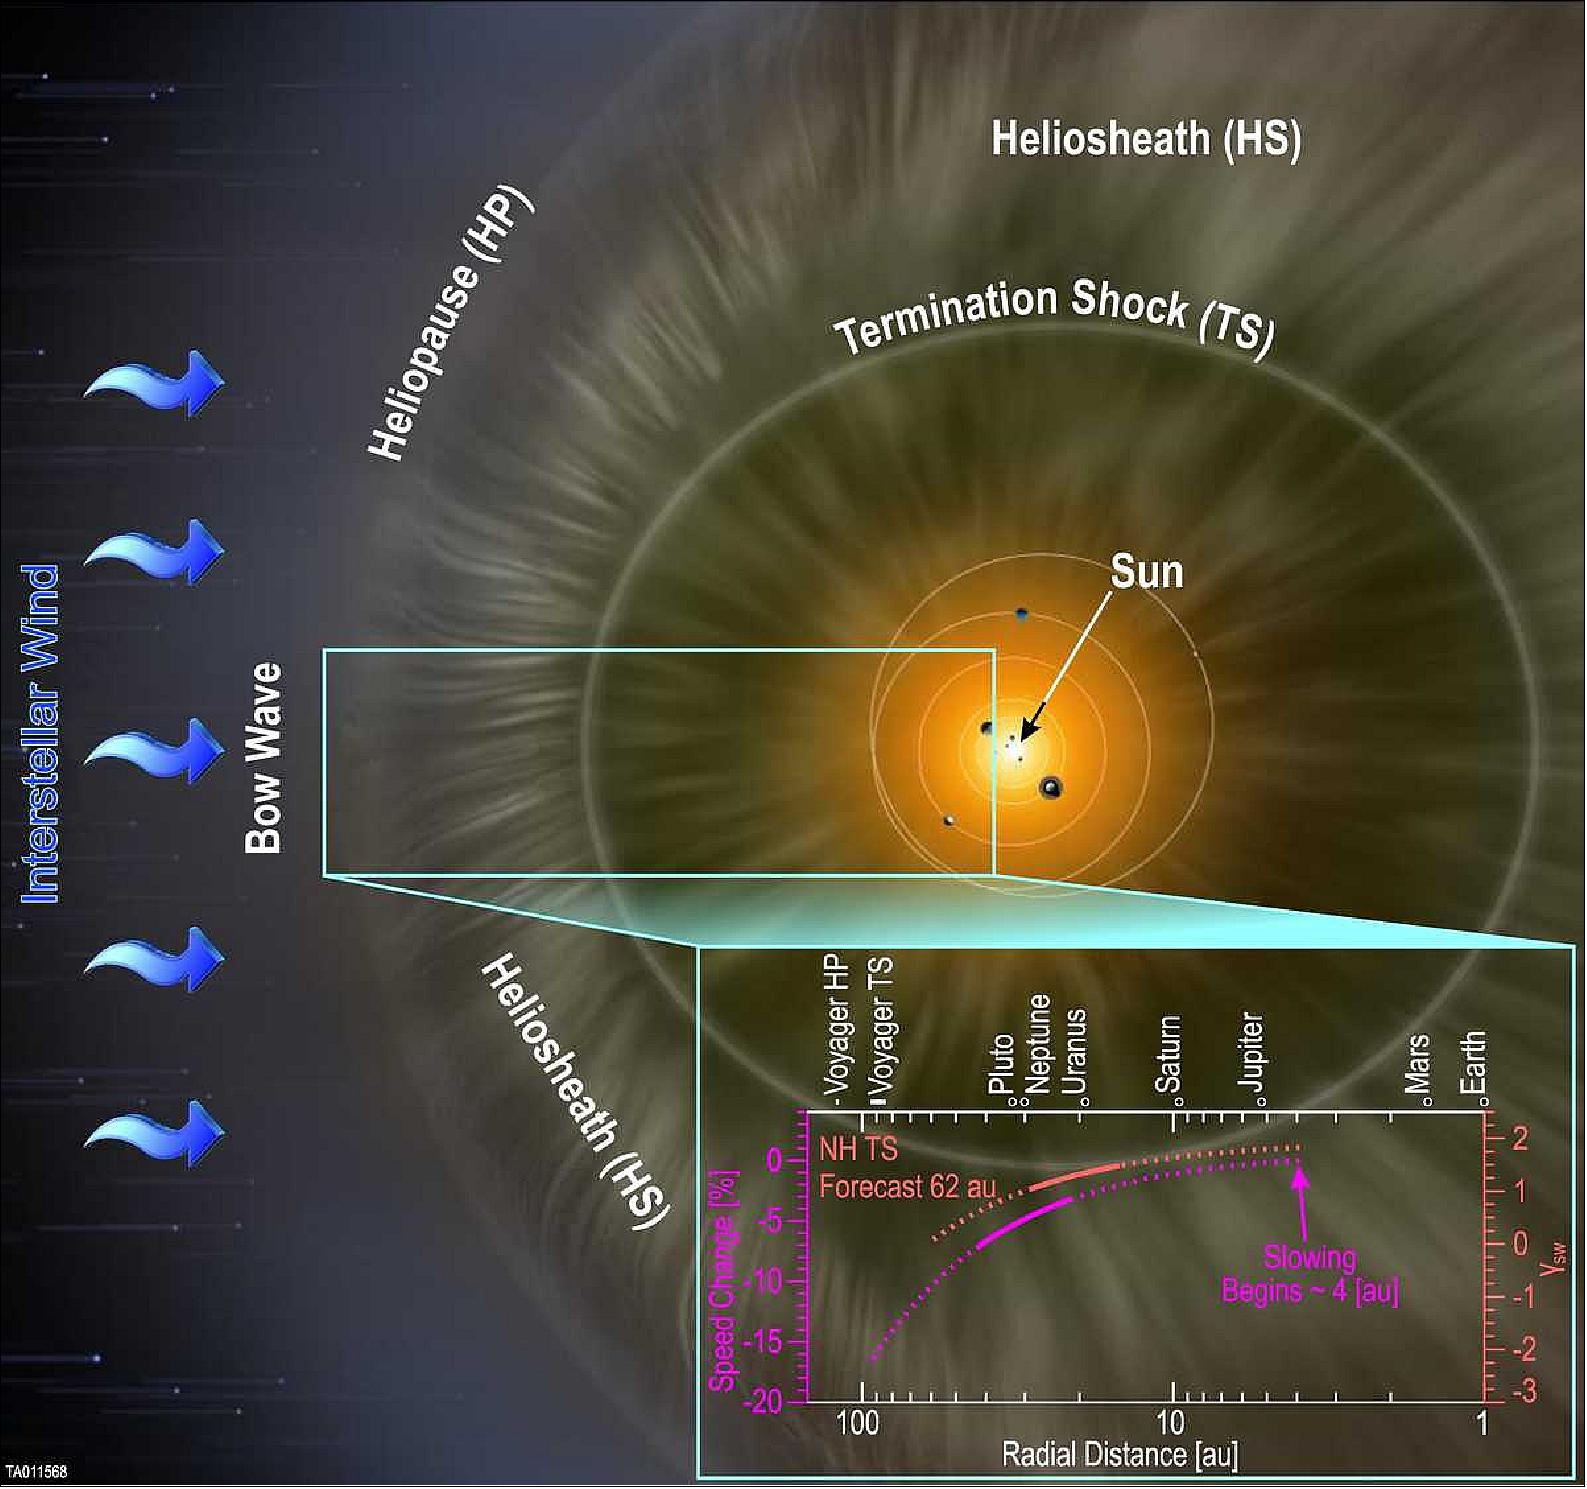 Figure 32: Solar wind speed diagram. The SWAP instrument aboard NASA's New Horizons spacecraft has confirmed that the solar wind slows as it travels farther from the Sun. This schematic of the heliosphere shows the solar wind begins slowing at approximately 4 AU radial distance from the Sun and continues to slow as it moves toward the outer solar system and picks up interstellar material. Current extrapolations reveal the termination shock may currently be closer than found by the Voyager spacecraft. However, increasing solar activity will soon expand the heliosphere and push the termination shock farther out, possibly to the 84-94 AU range encountered by the Voyager spacecraft (image credit: SwRI, background artist rendering by NASA and Adler Planetarium)